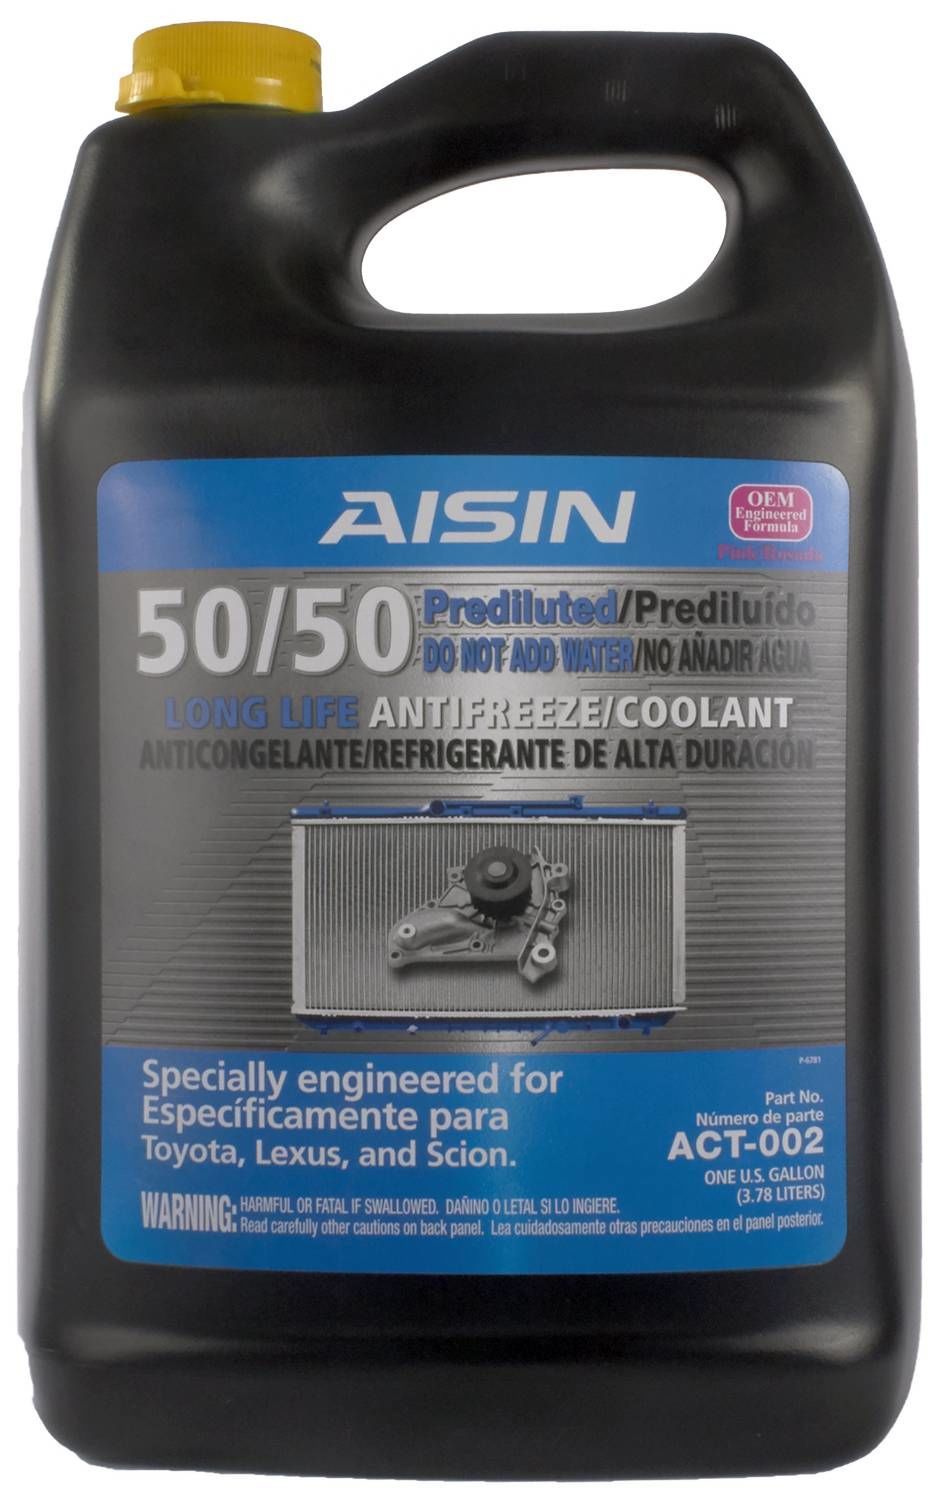 AISIN WORLD CORP OF AMERICA - AISIN Vehicle Specific Coolant / Antifreeze - AIS ACT-002